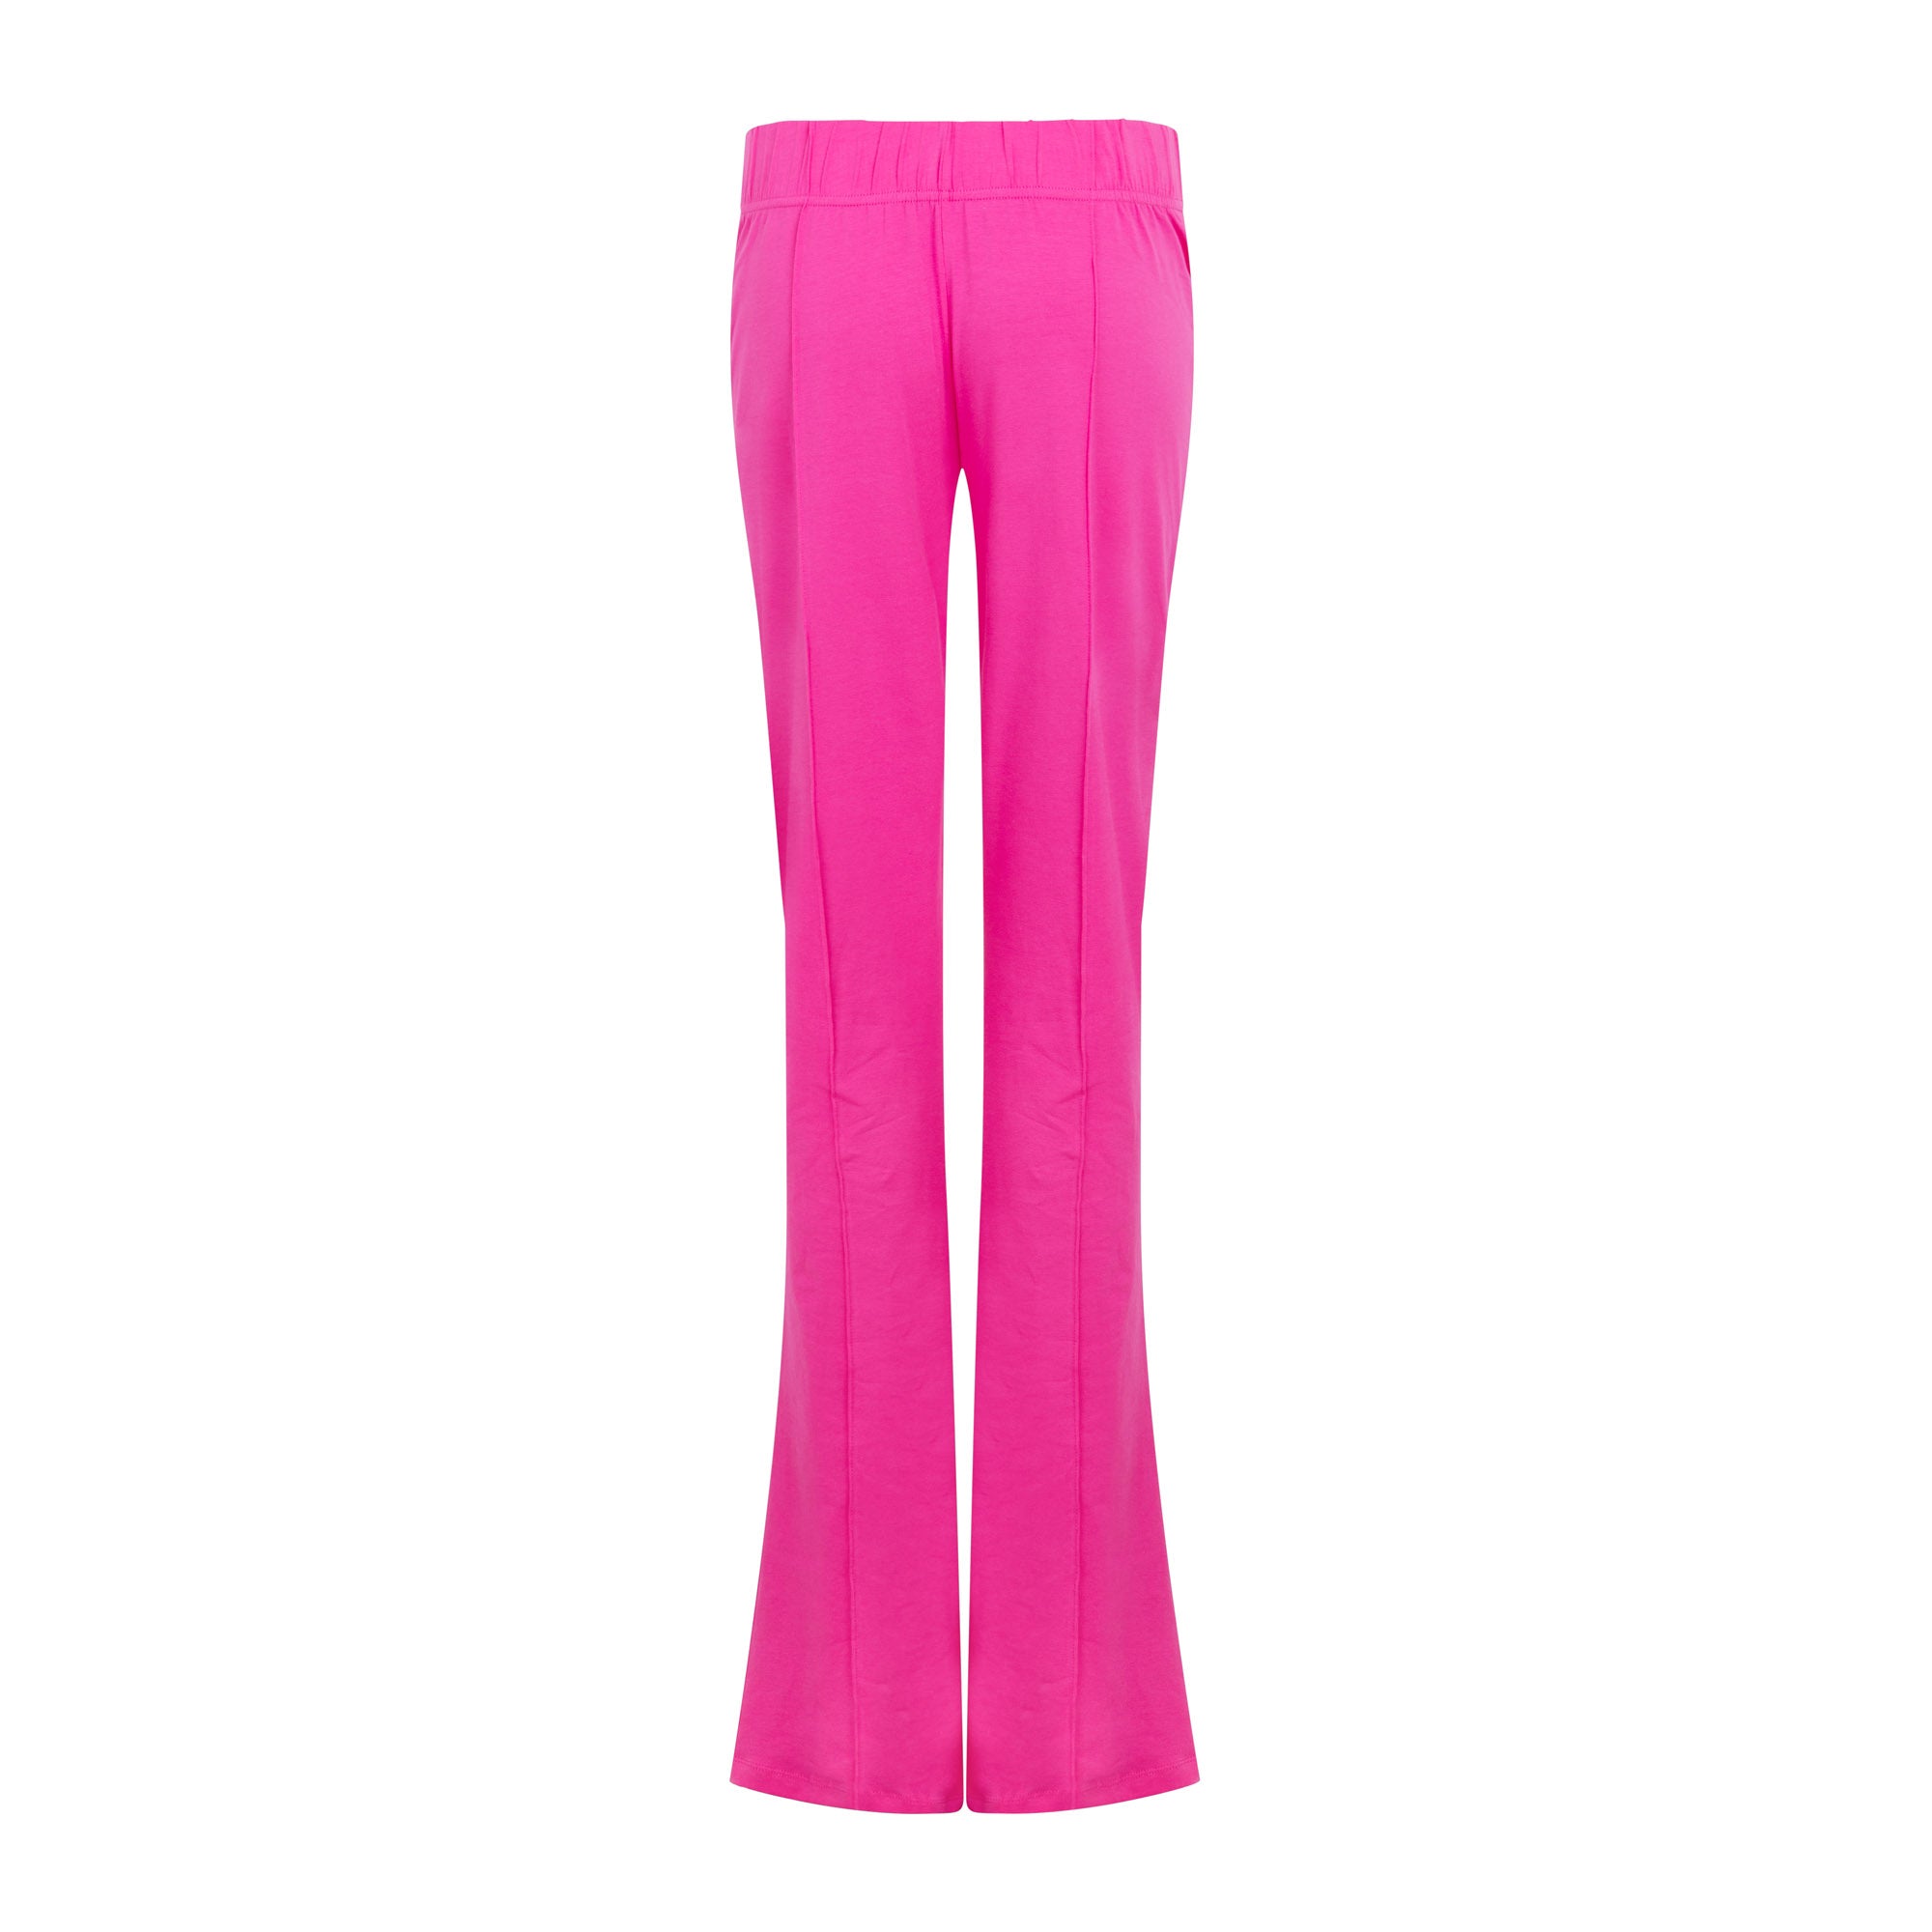 Flared trousers, pink